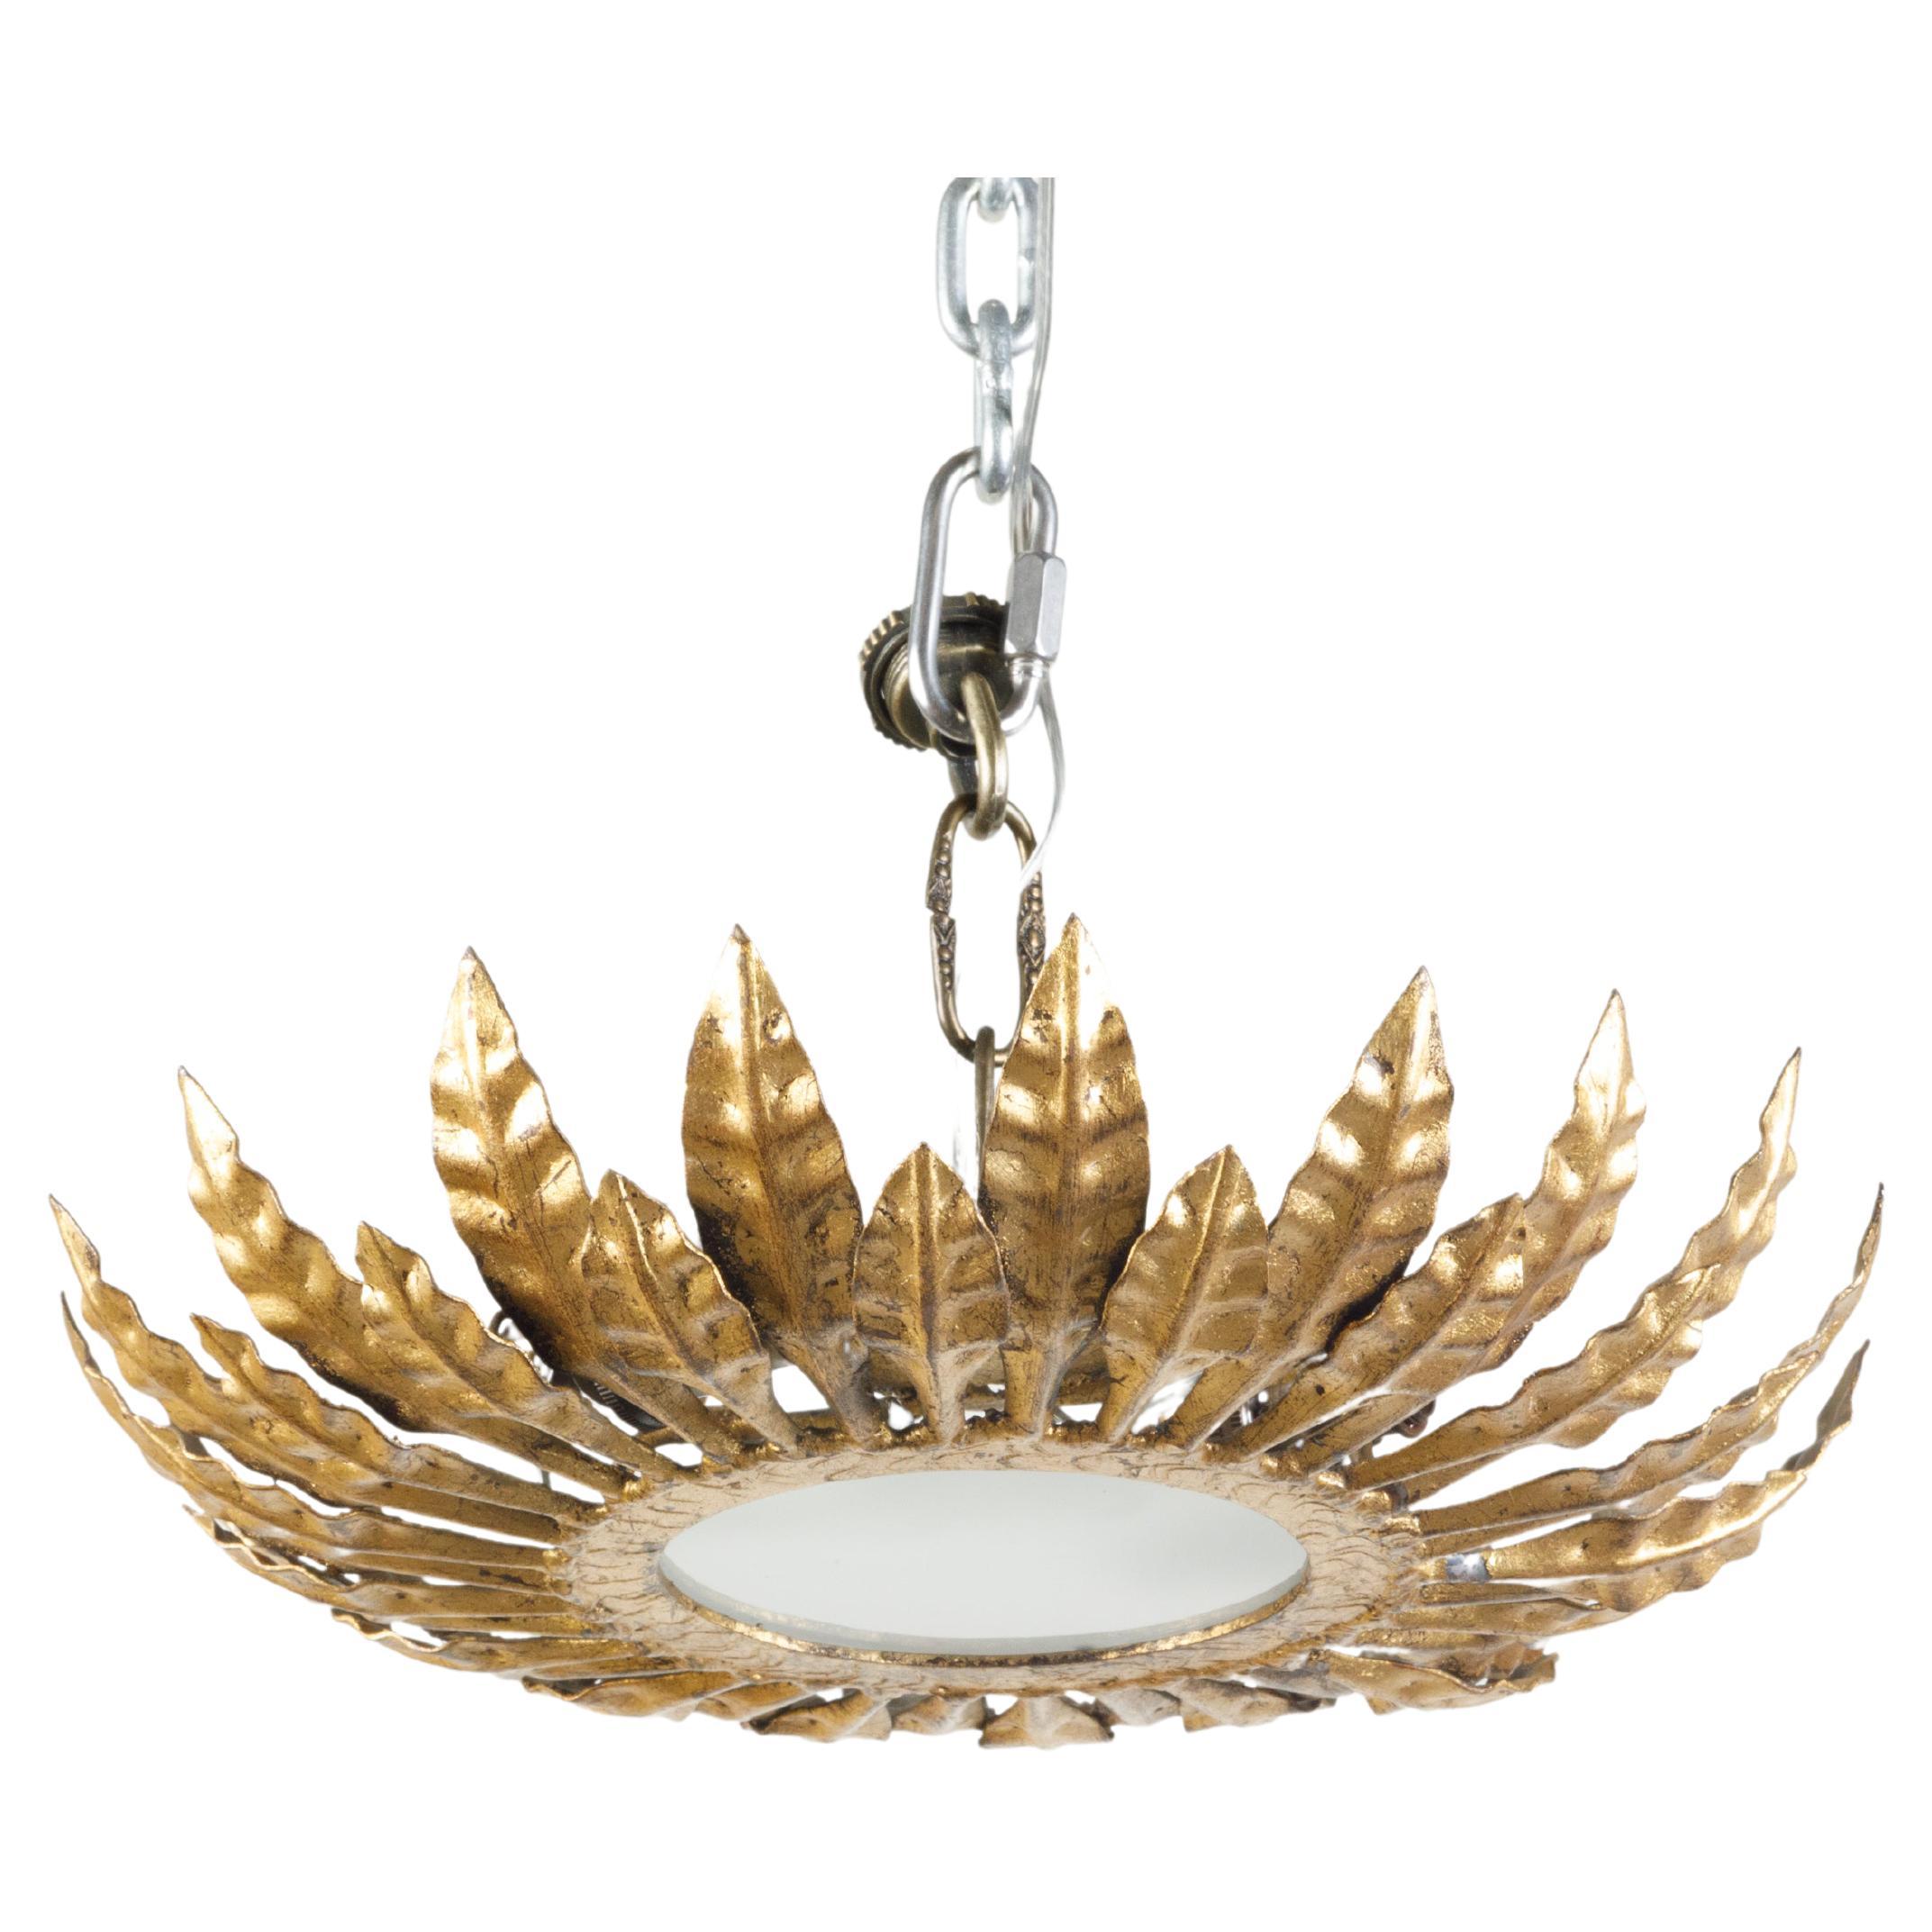 Midcentury Spanish Gilt Metal Crown Chandelier with Leaves and Frosted Glass